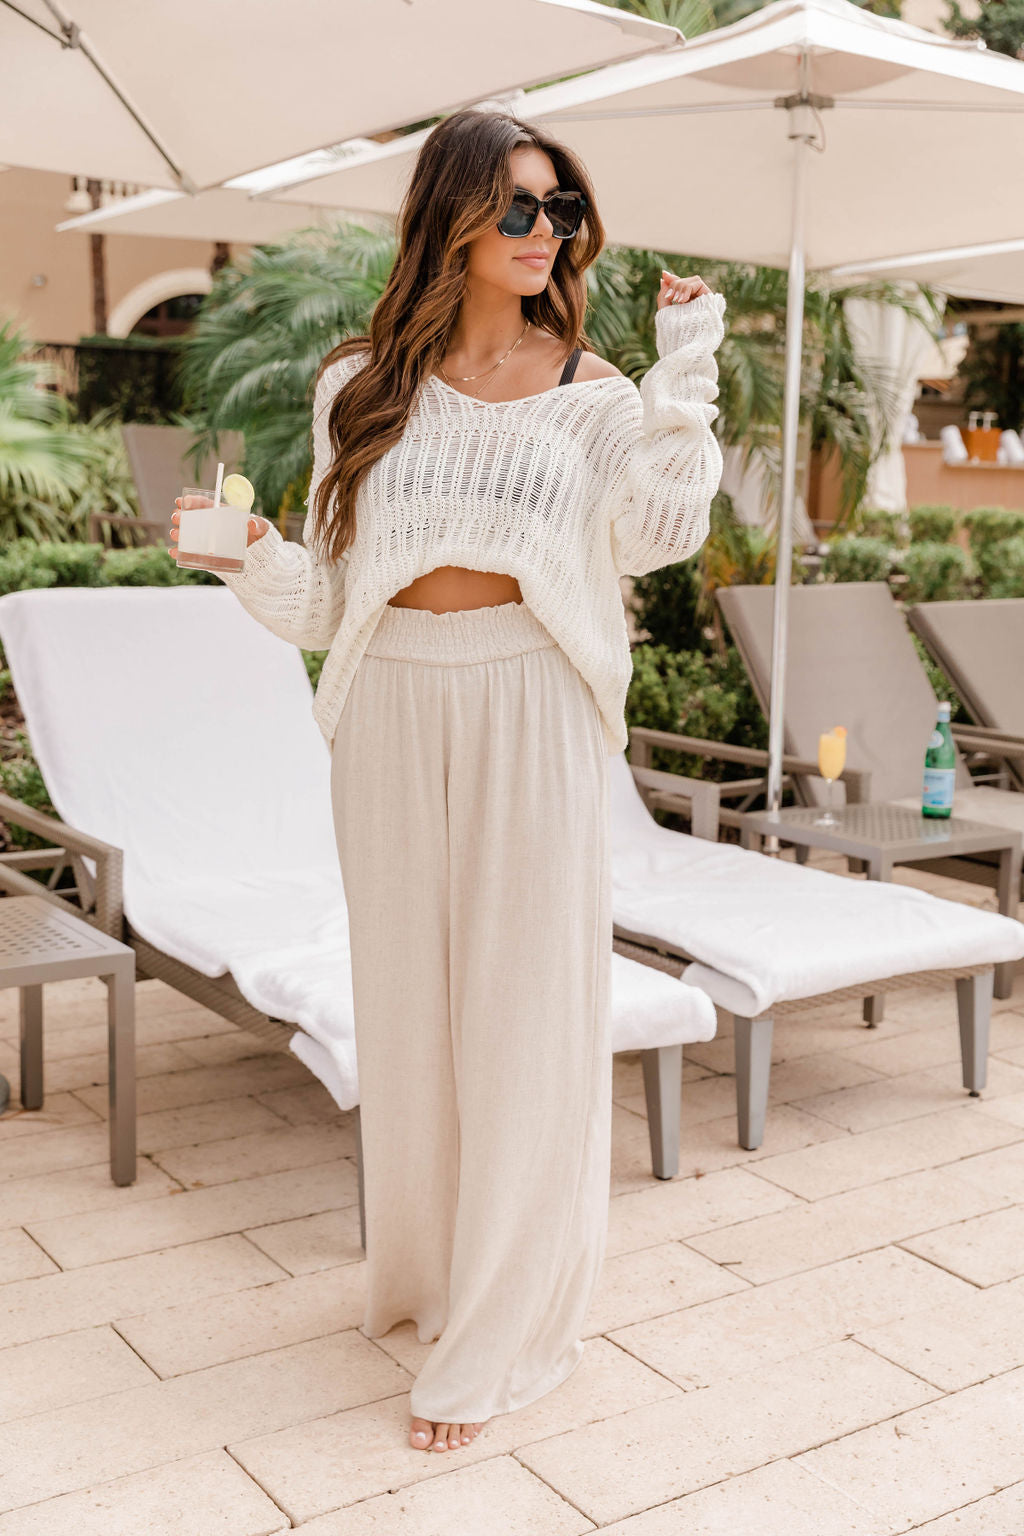 Find A Getaway Cream Sweater – Pink Lily